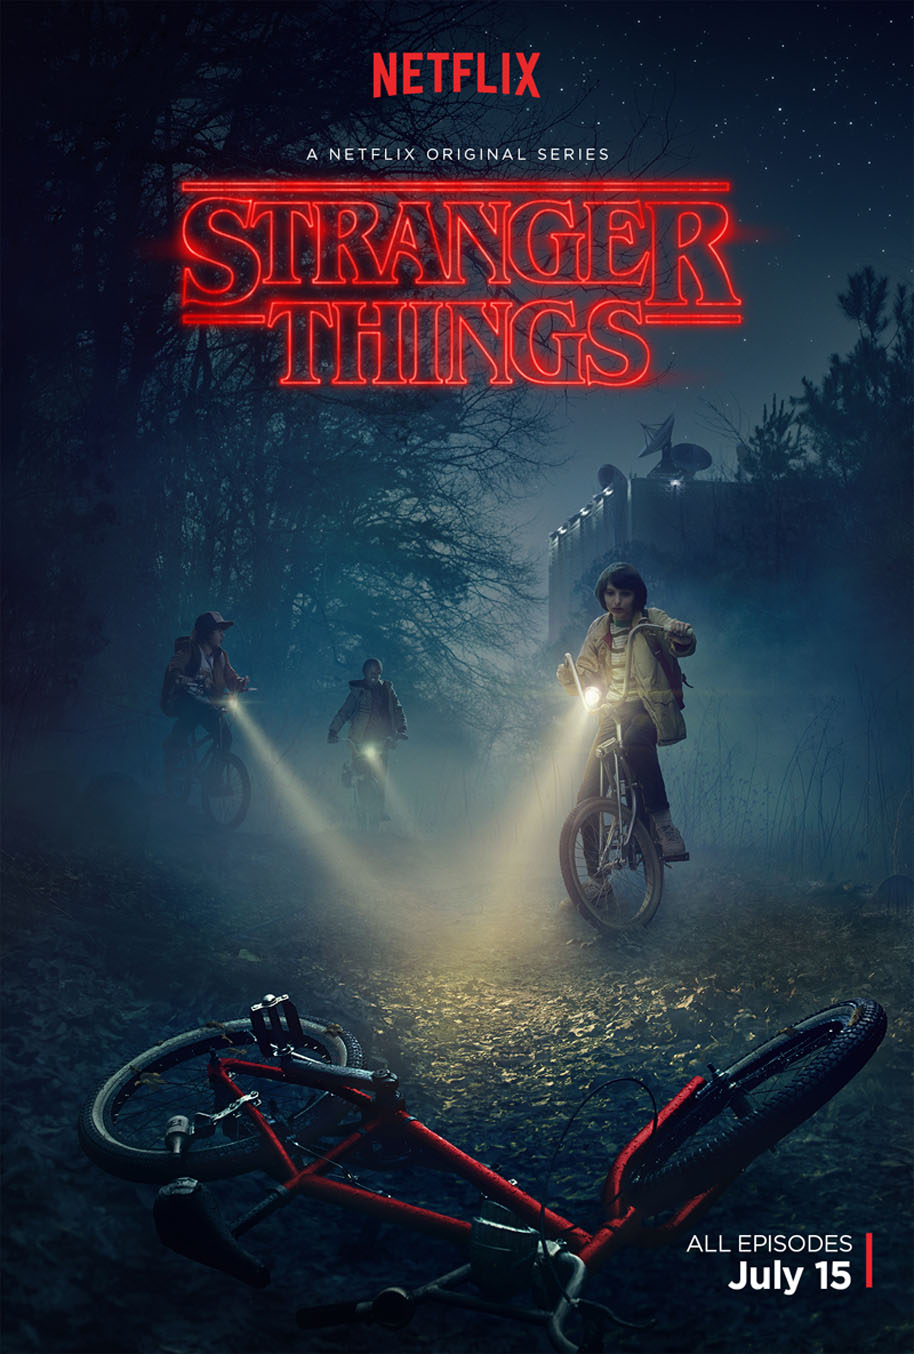 Let's Dissect This Pretty New Stranger Things Poster for Clues